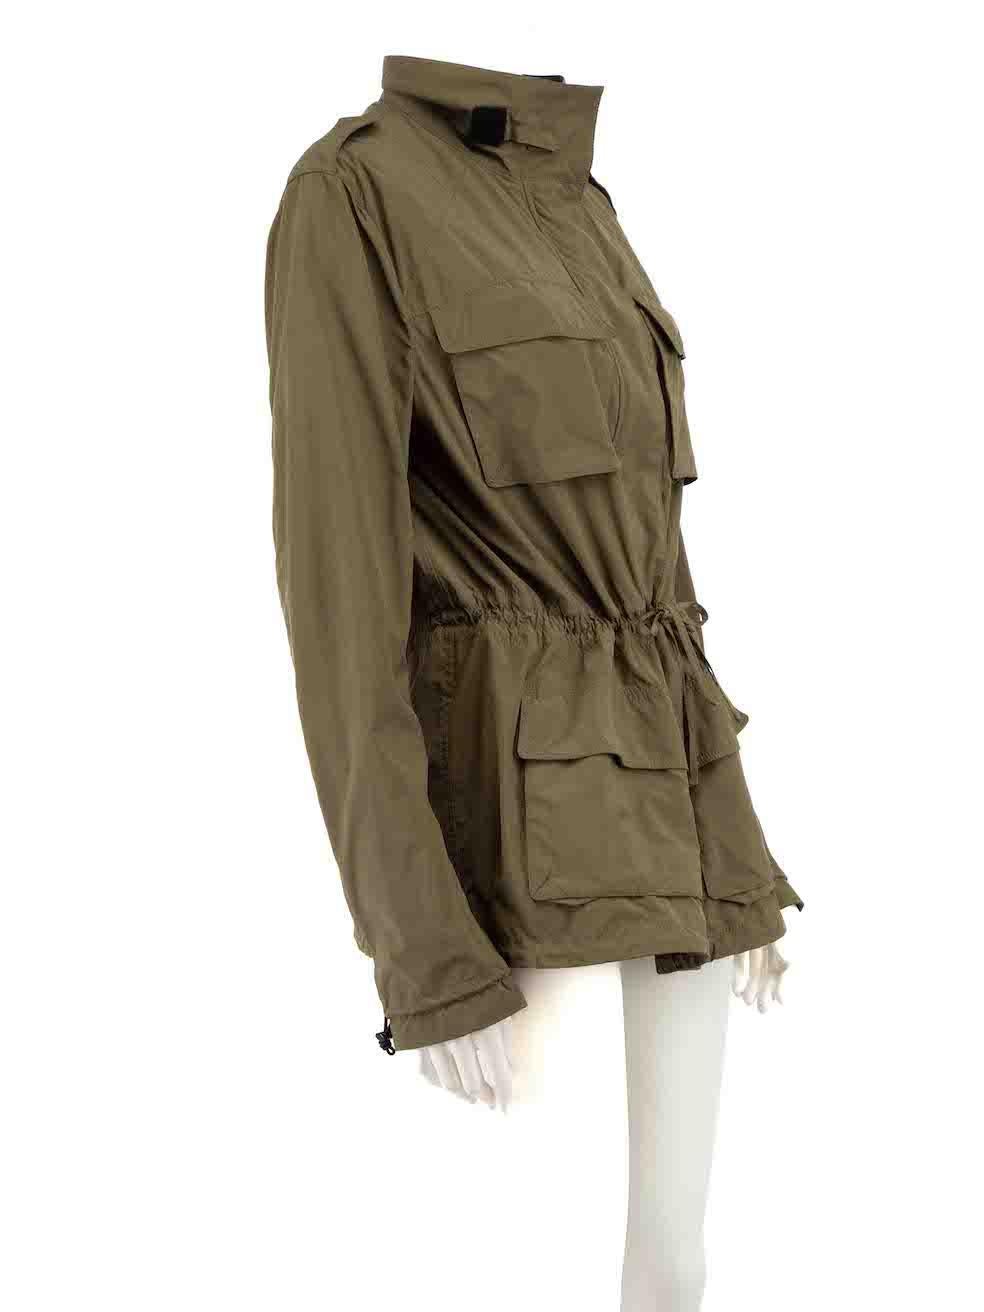 CONDITION is Very good. Minimal wear to jacket is evident. Minimal wear to the right sleeve with tiny mark on this used Tom Ford designer resale item.
 
 Details
 Khaki
 Polyester
 Windbreaker utility jacket
 Hip length
 3x Drawstring on waistline
